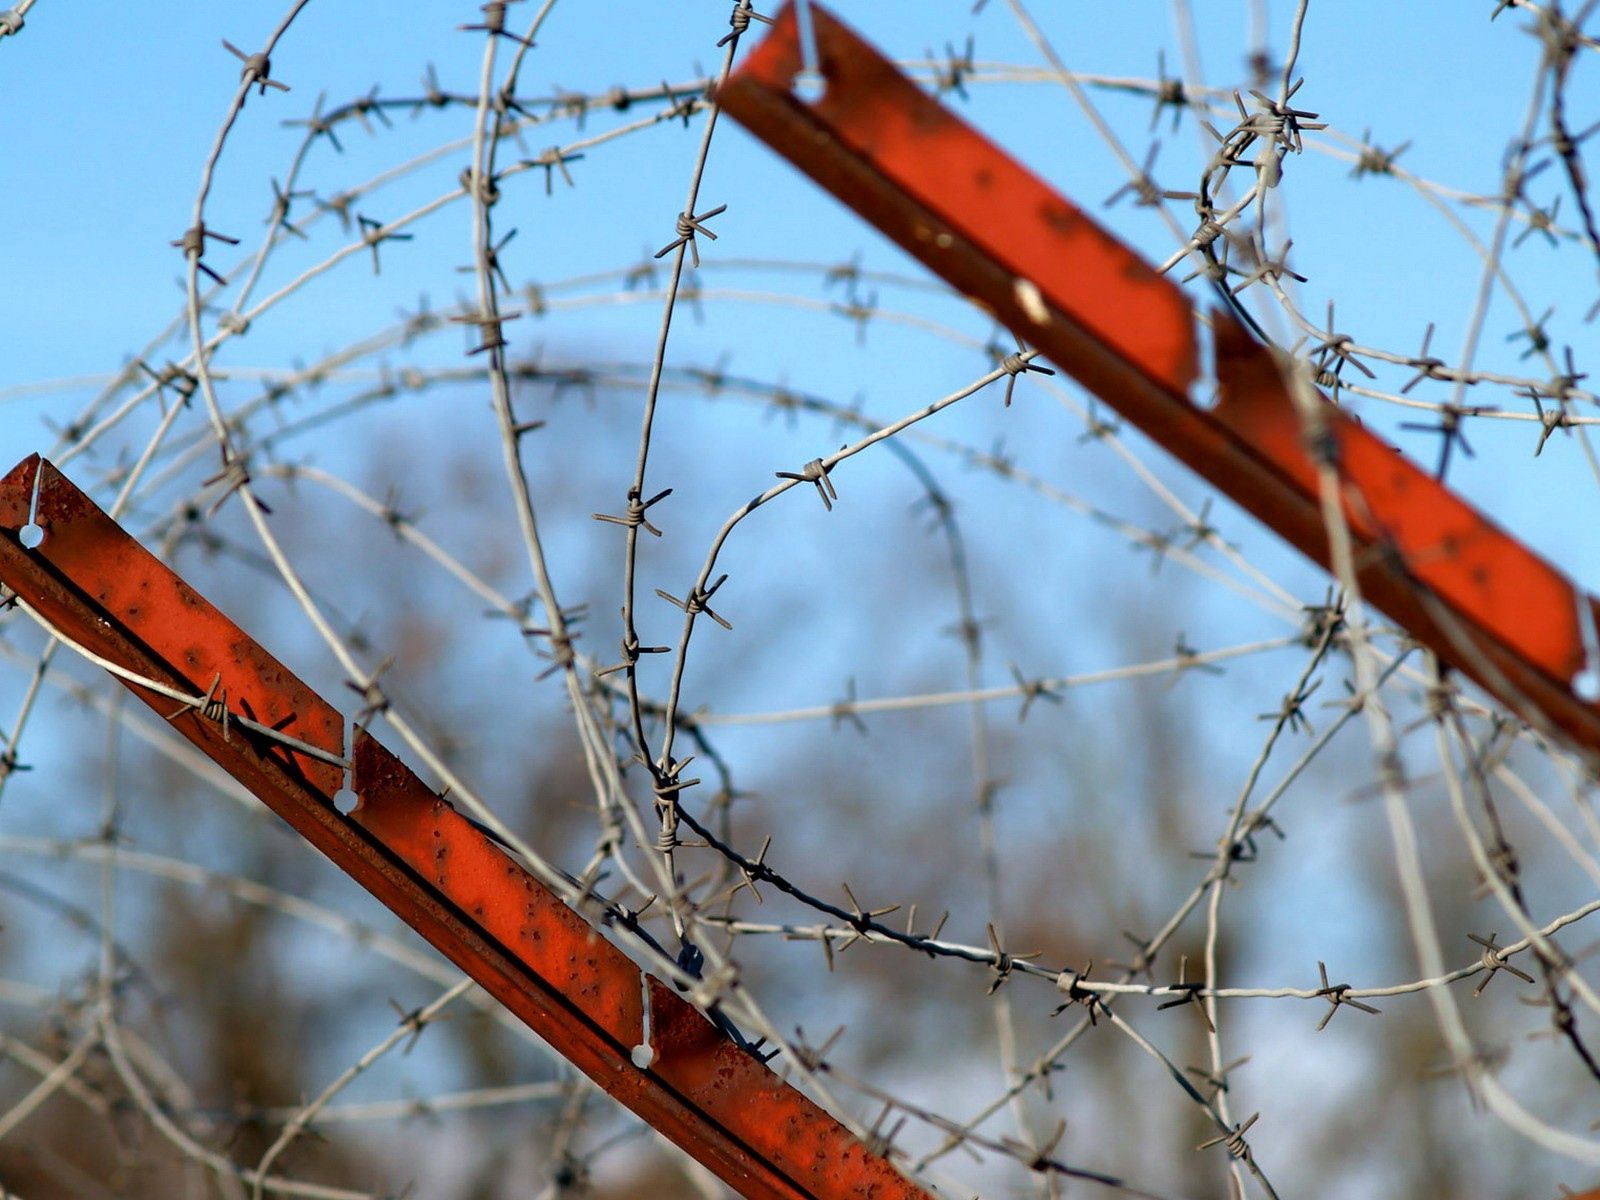 miscellanea, sky, miscellaneous, paint, metal, rust, barbed wire, stretched, tense